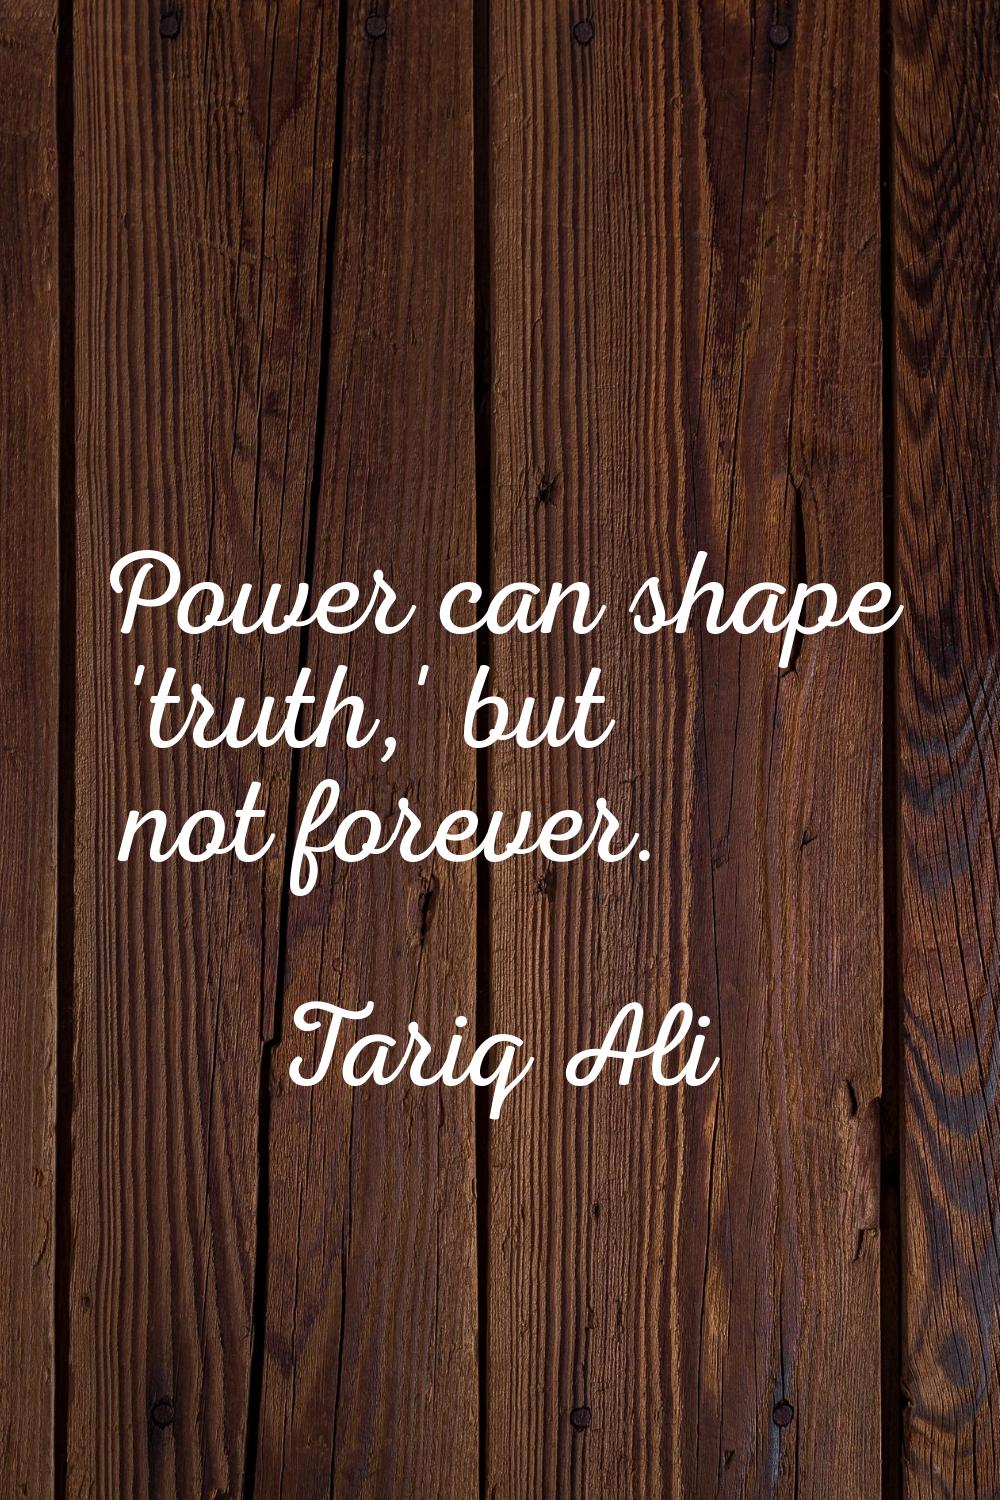 Power can shape 'truth,' but not forever.